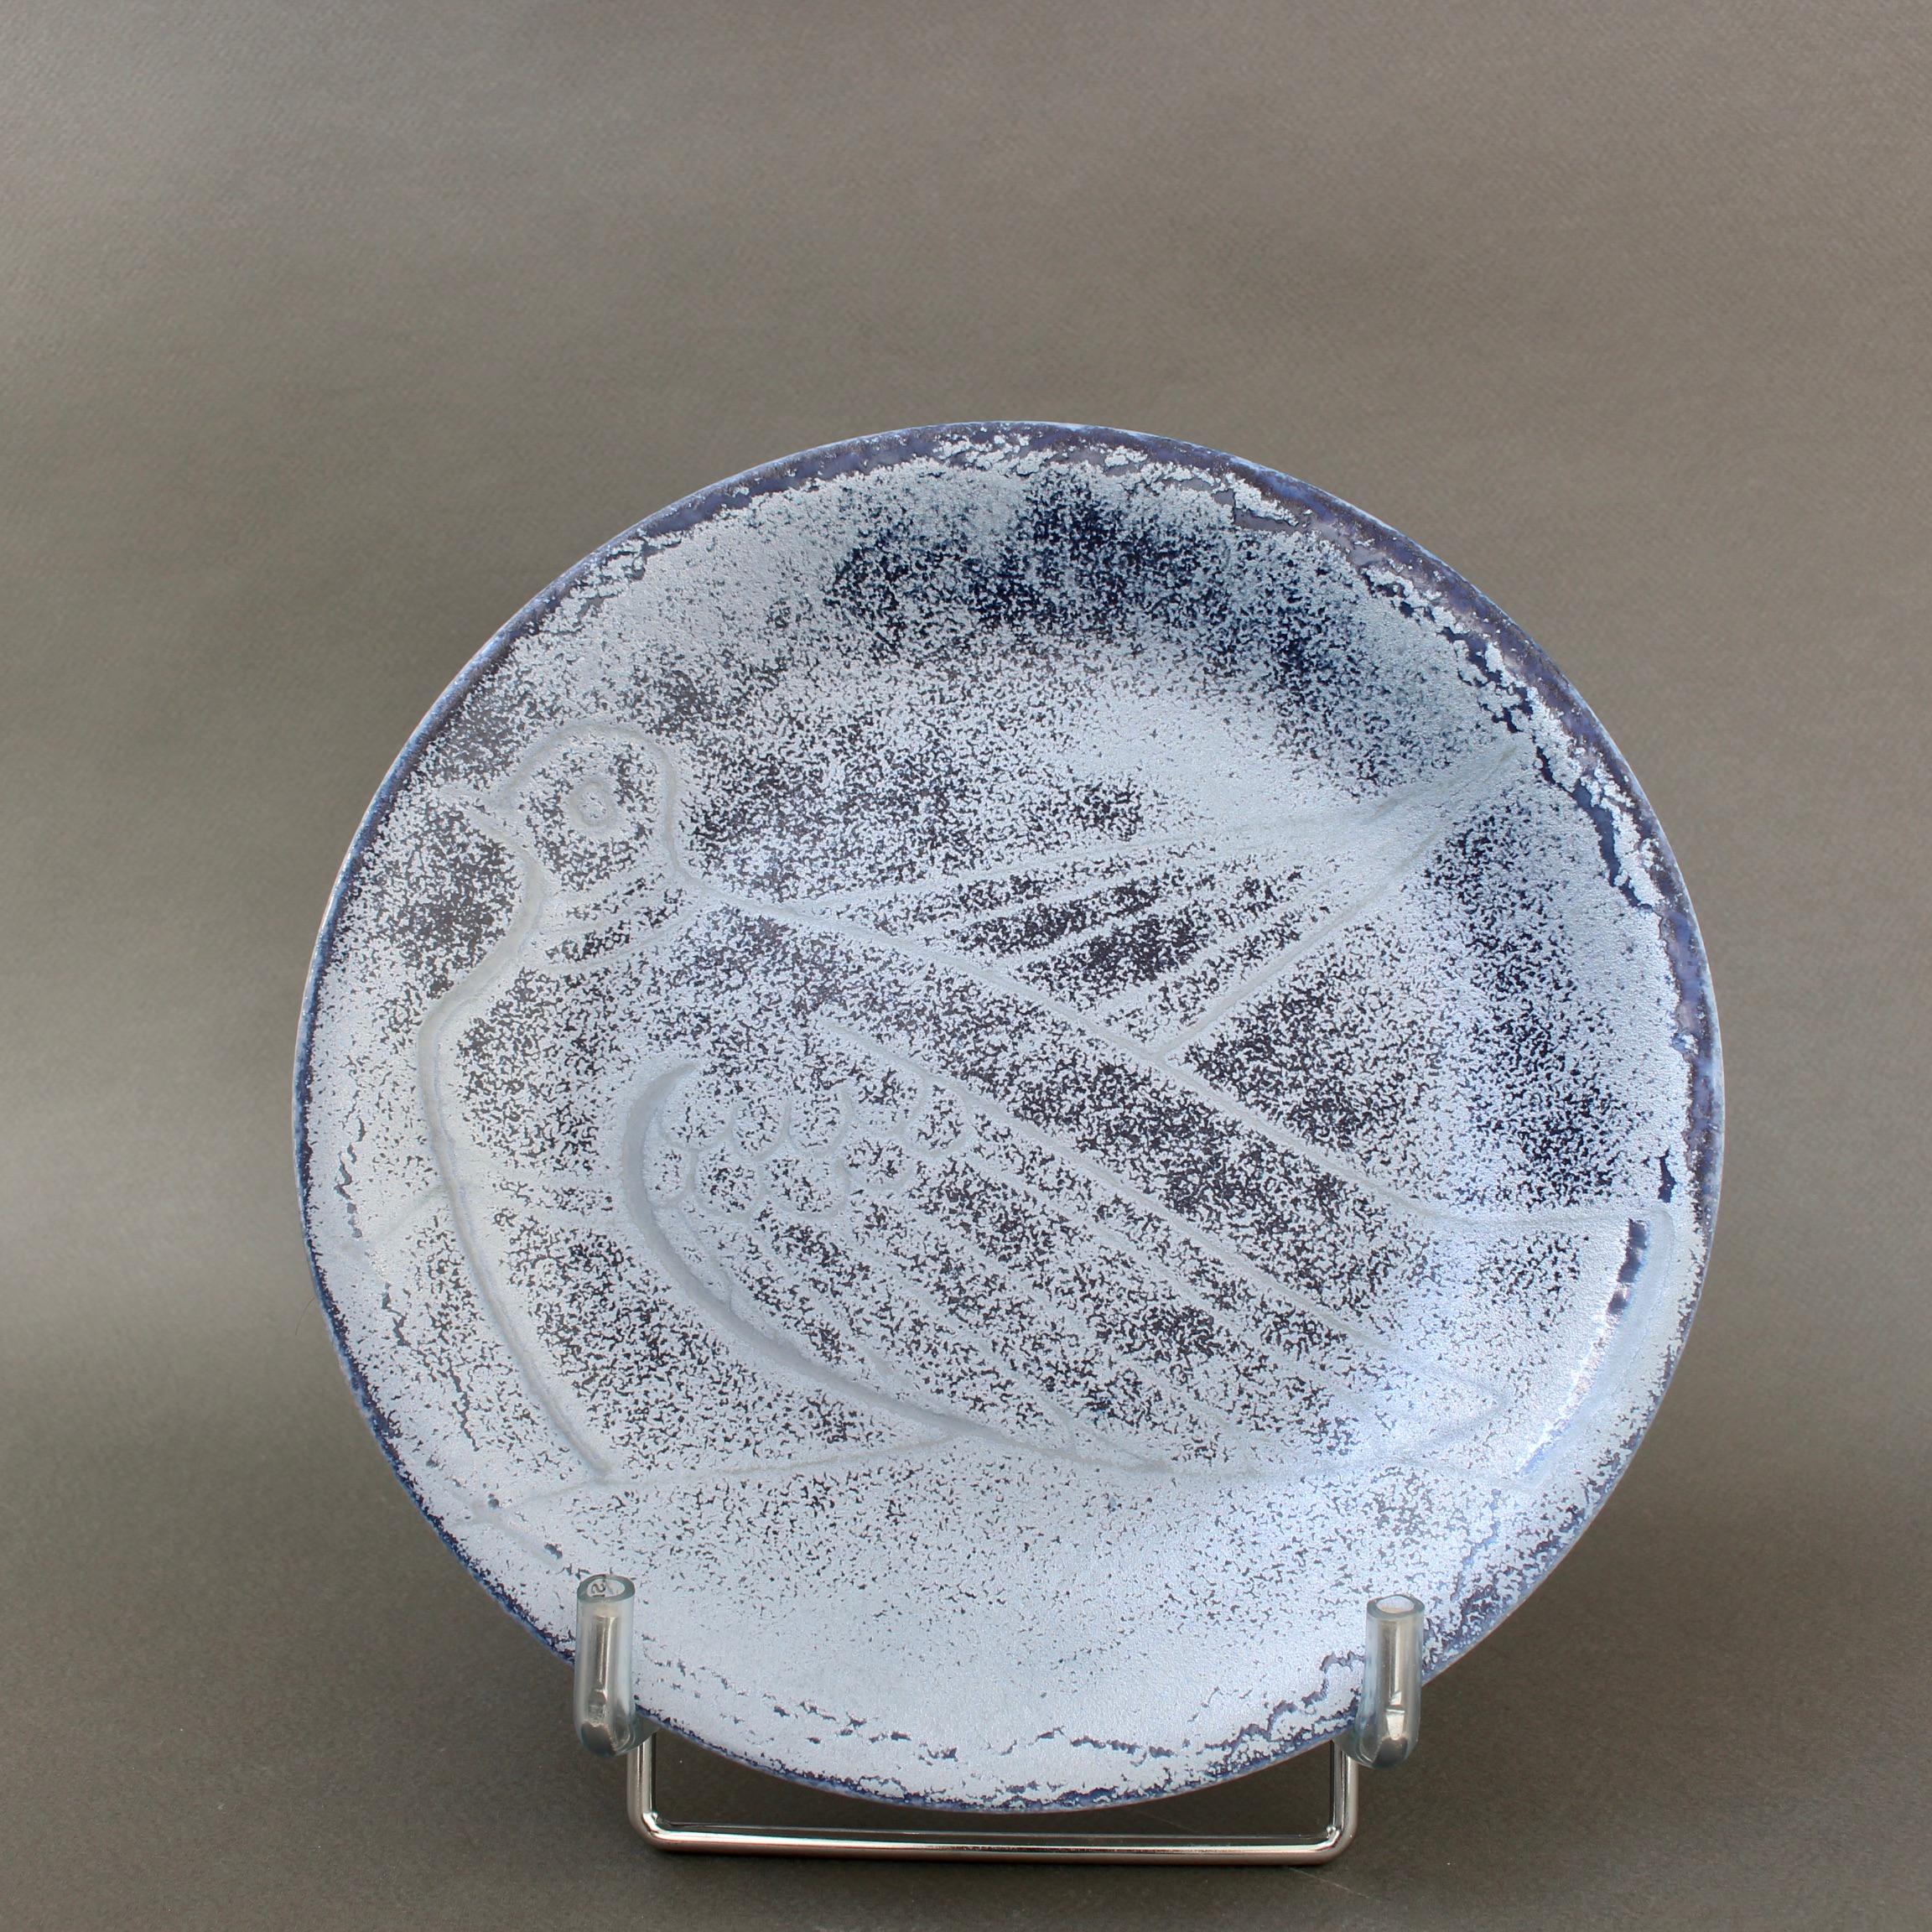 Mid-century decorative plate by ceramicist, Roger Capron (circa 1960). Iridescent blue with an incised dove, this is a Capron style rarely available. The dove has been a symbol of peace for centuries. Picasso famously created a very limited edition